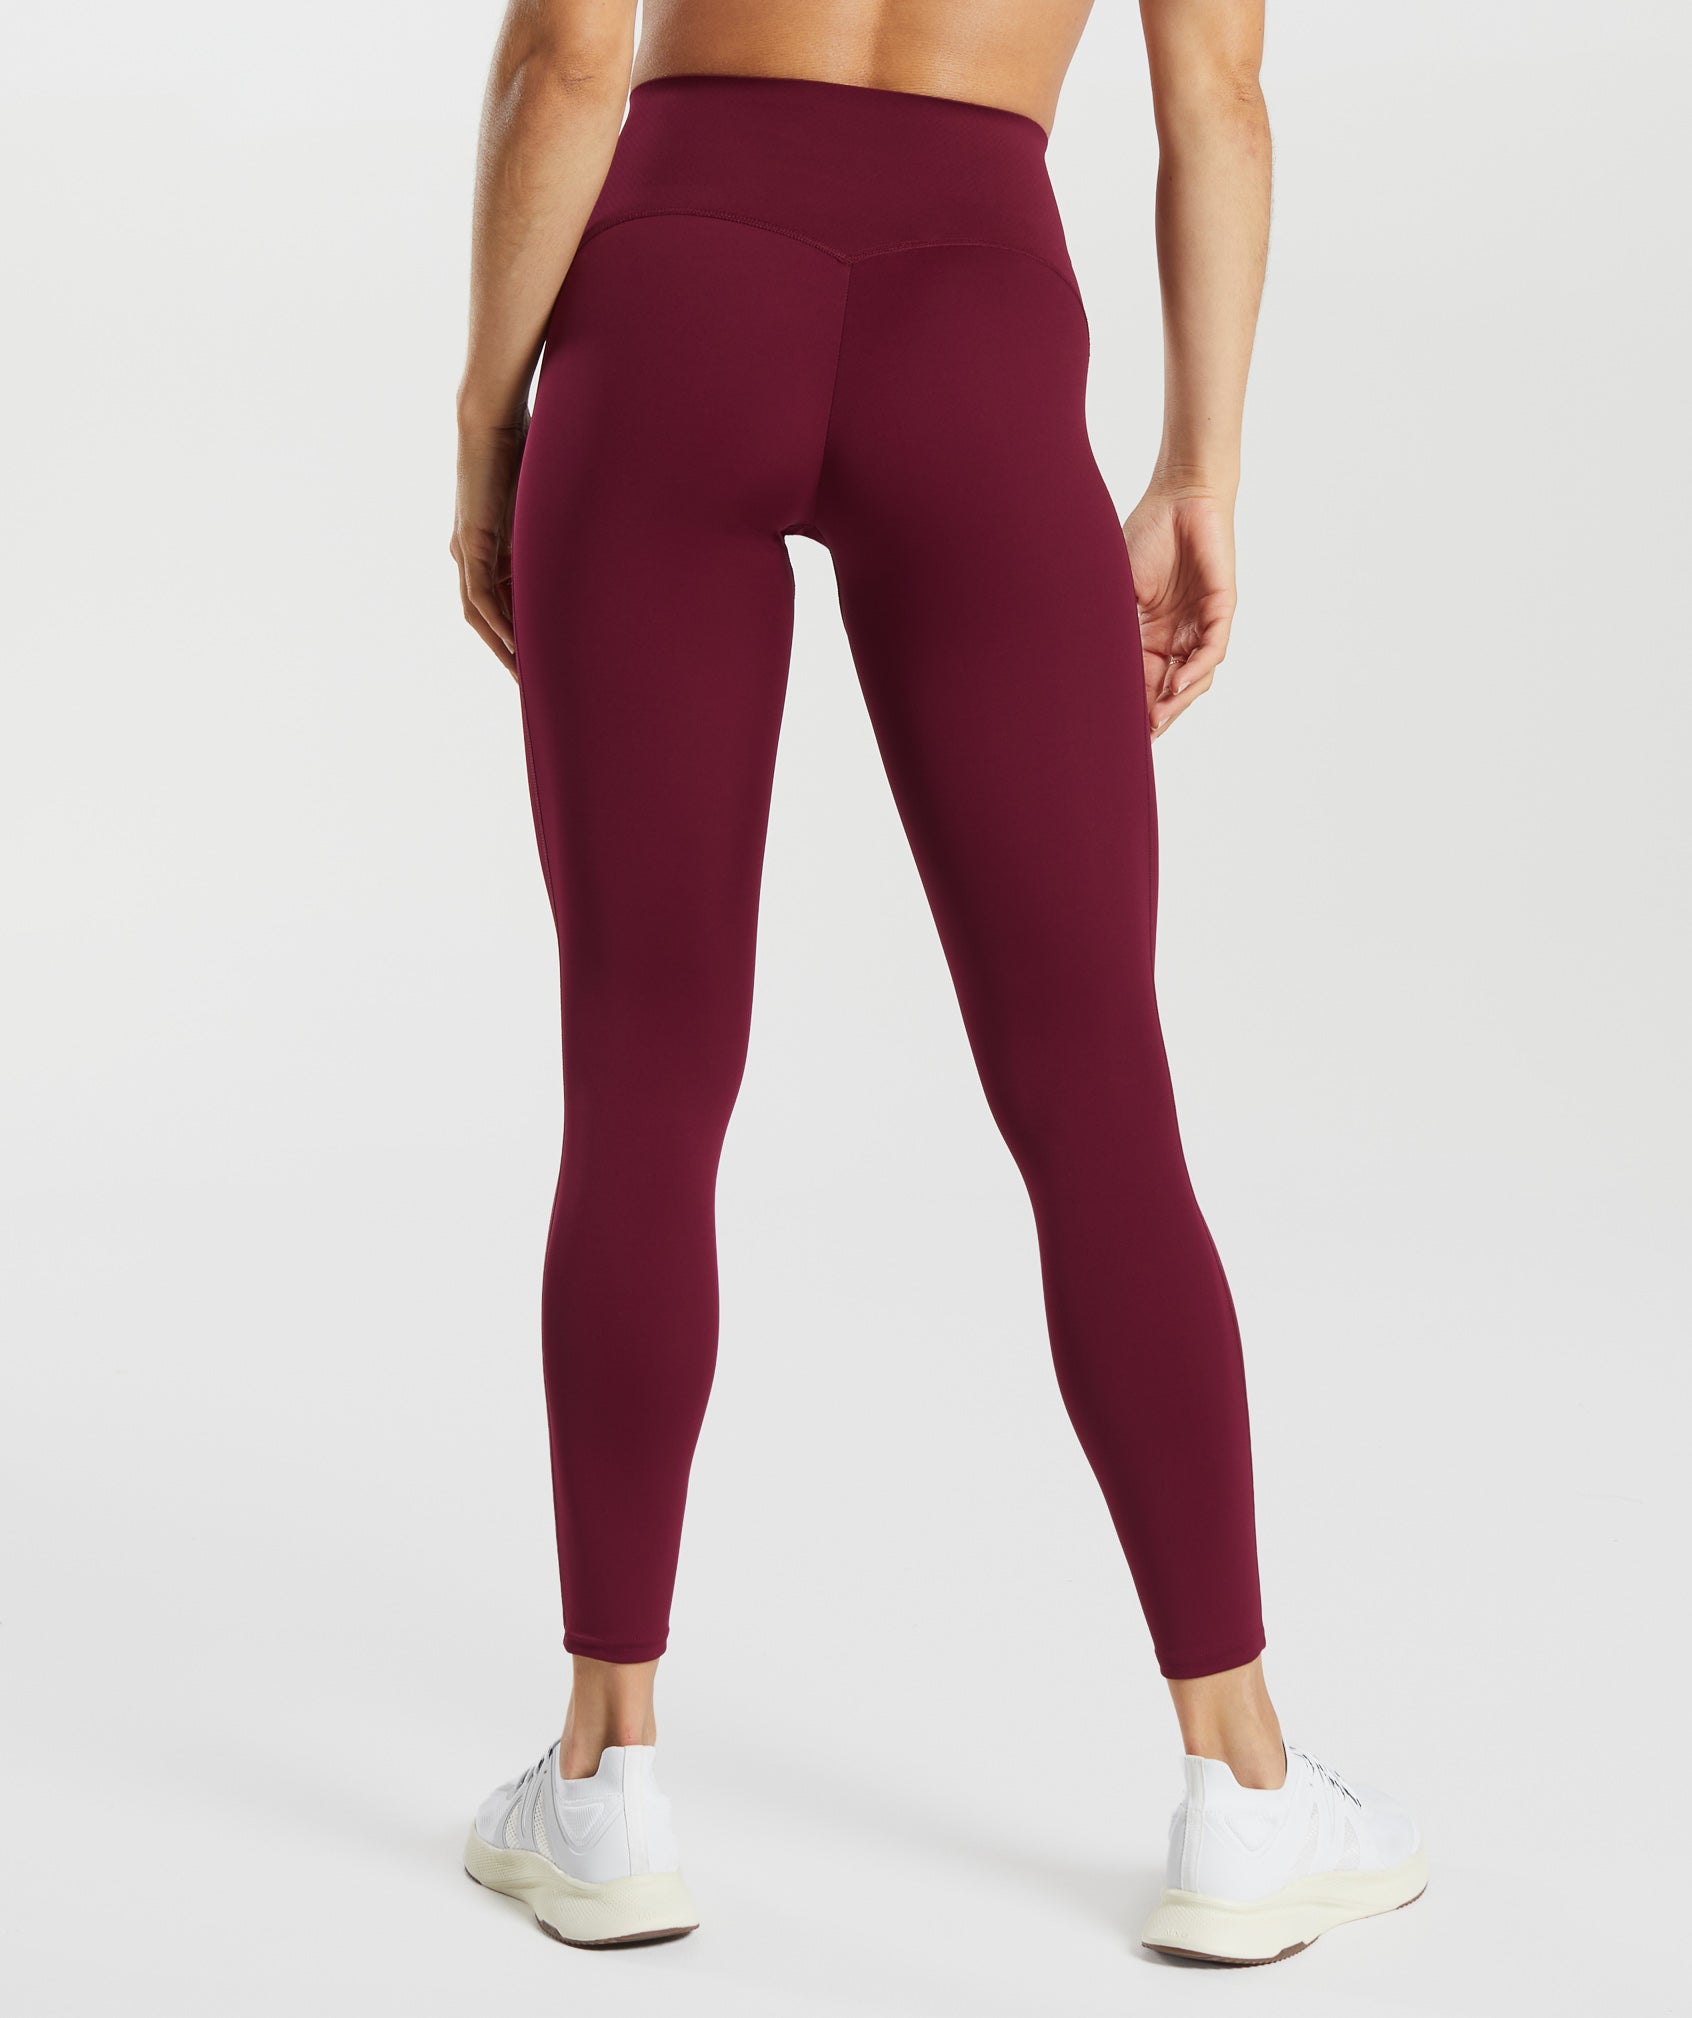 Waist Support Leggings in Plum Pink - view 4